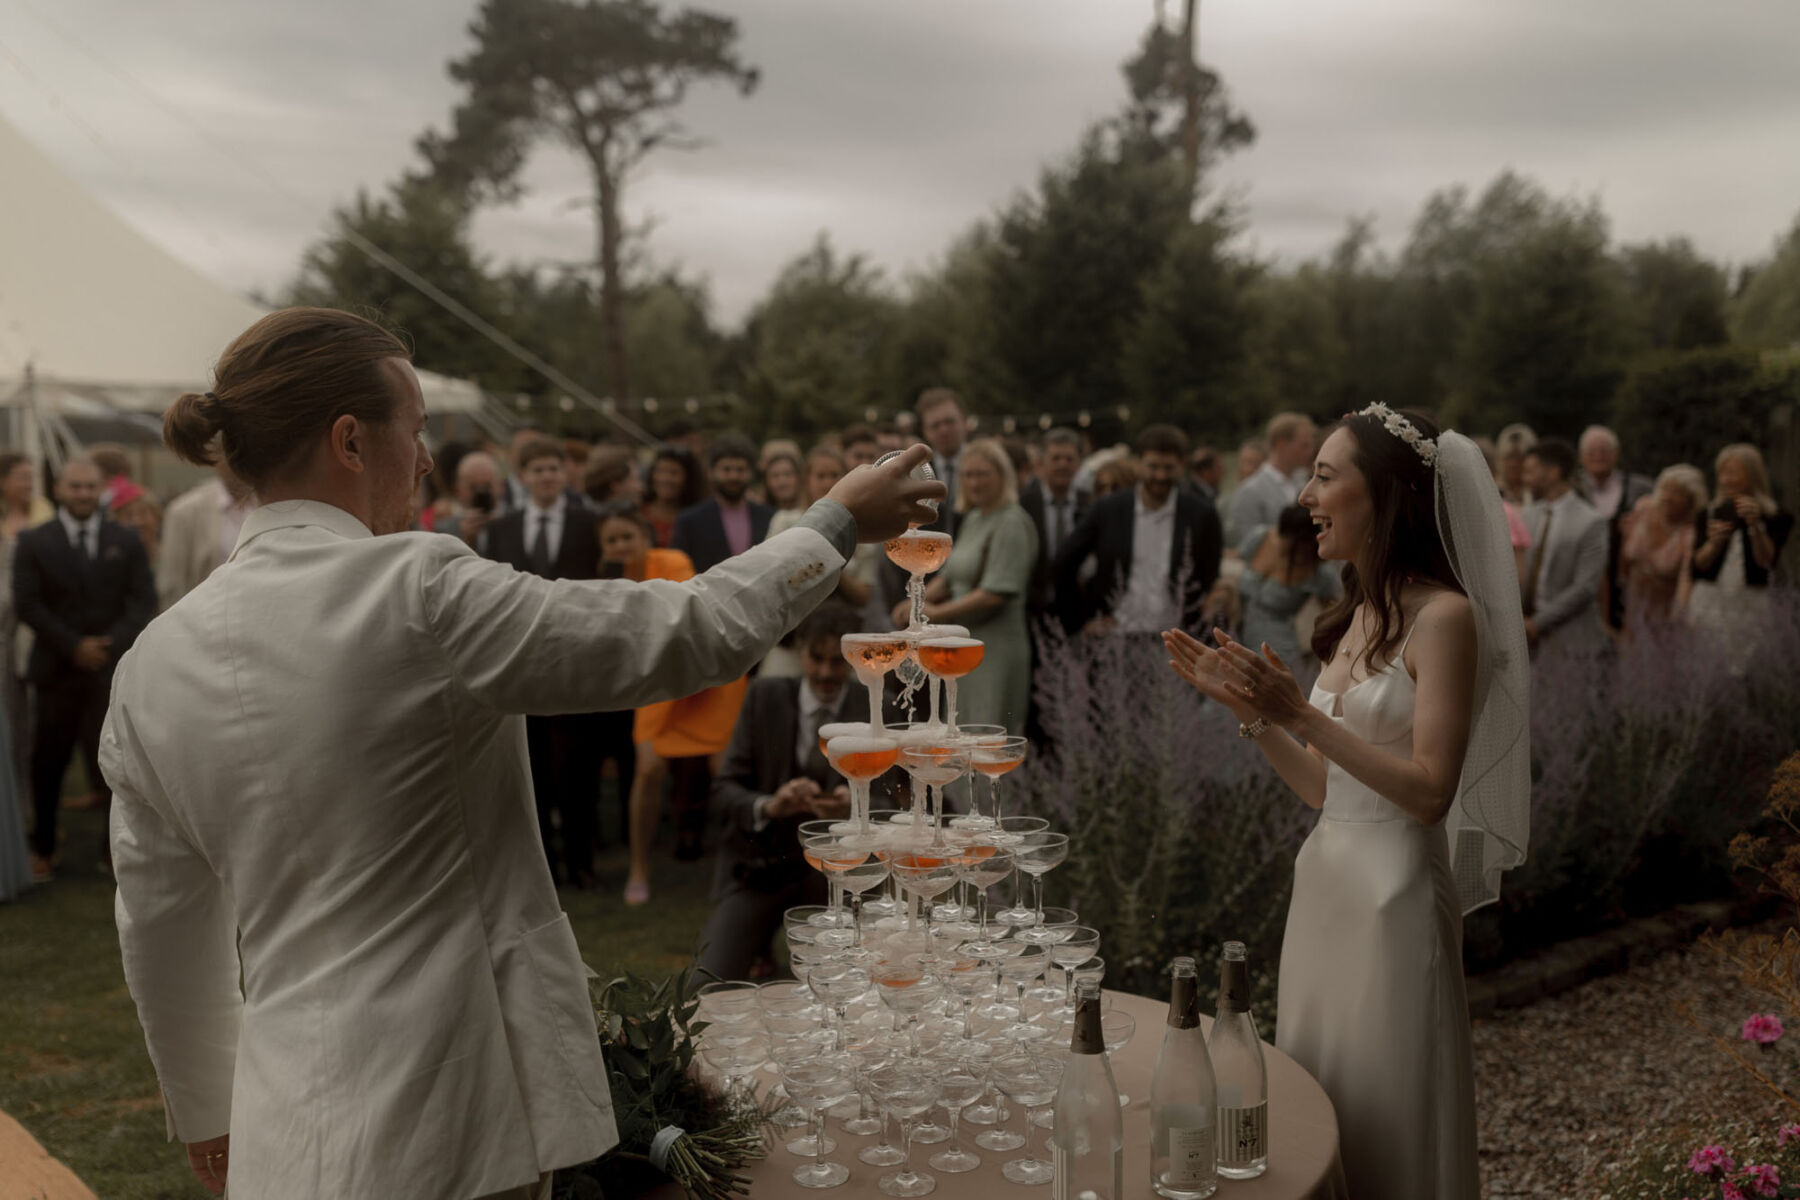 Champagne tower at Scarlet Hall wedding venue, Cheshire. Groom in white suit. Bride in Galvan wedding dress.